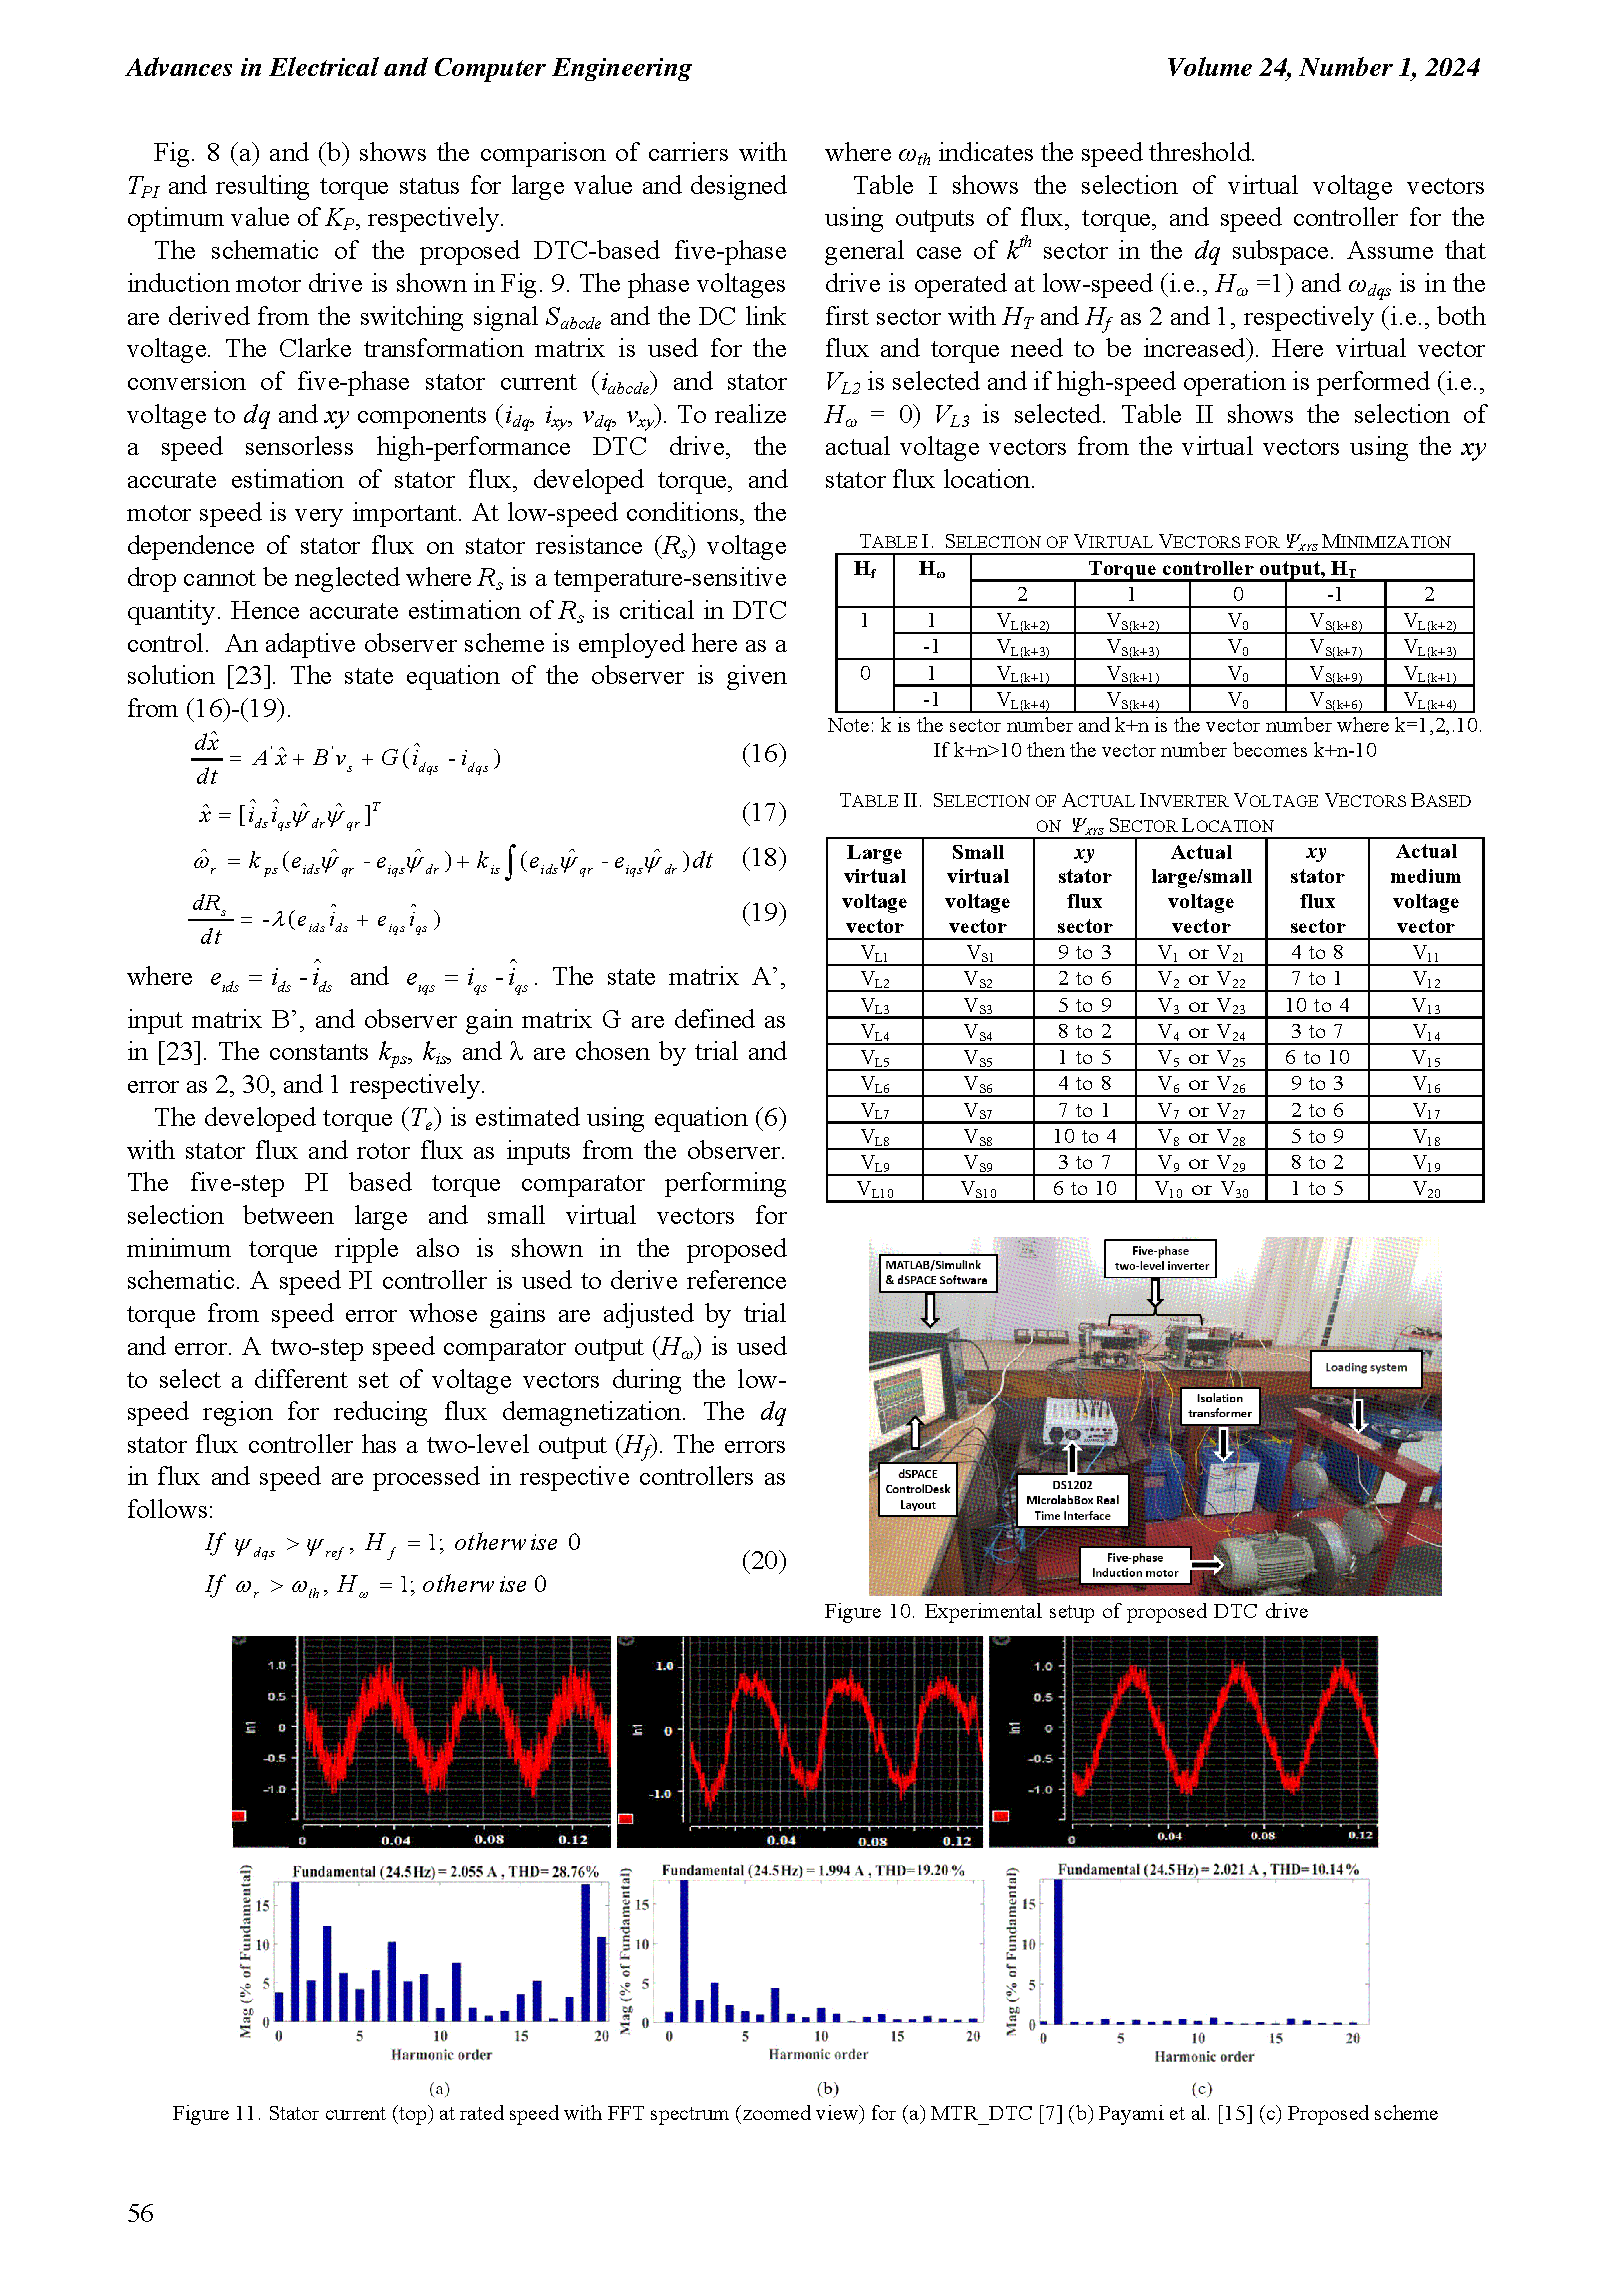 PDF Quickview for paper with DOI:10.4316/AECE.2024.01006